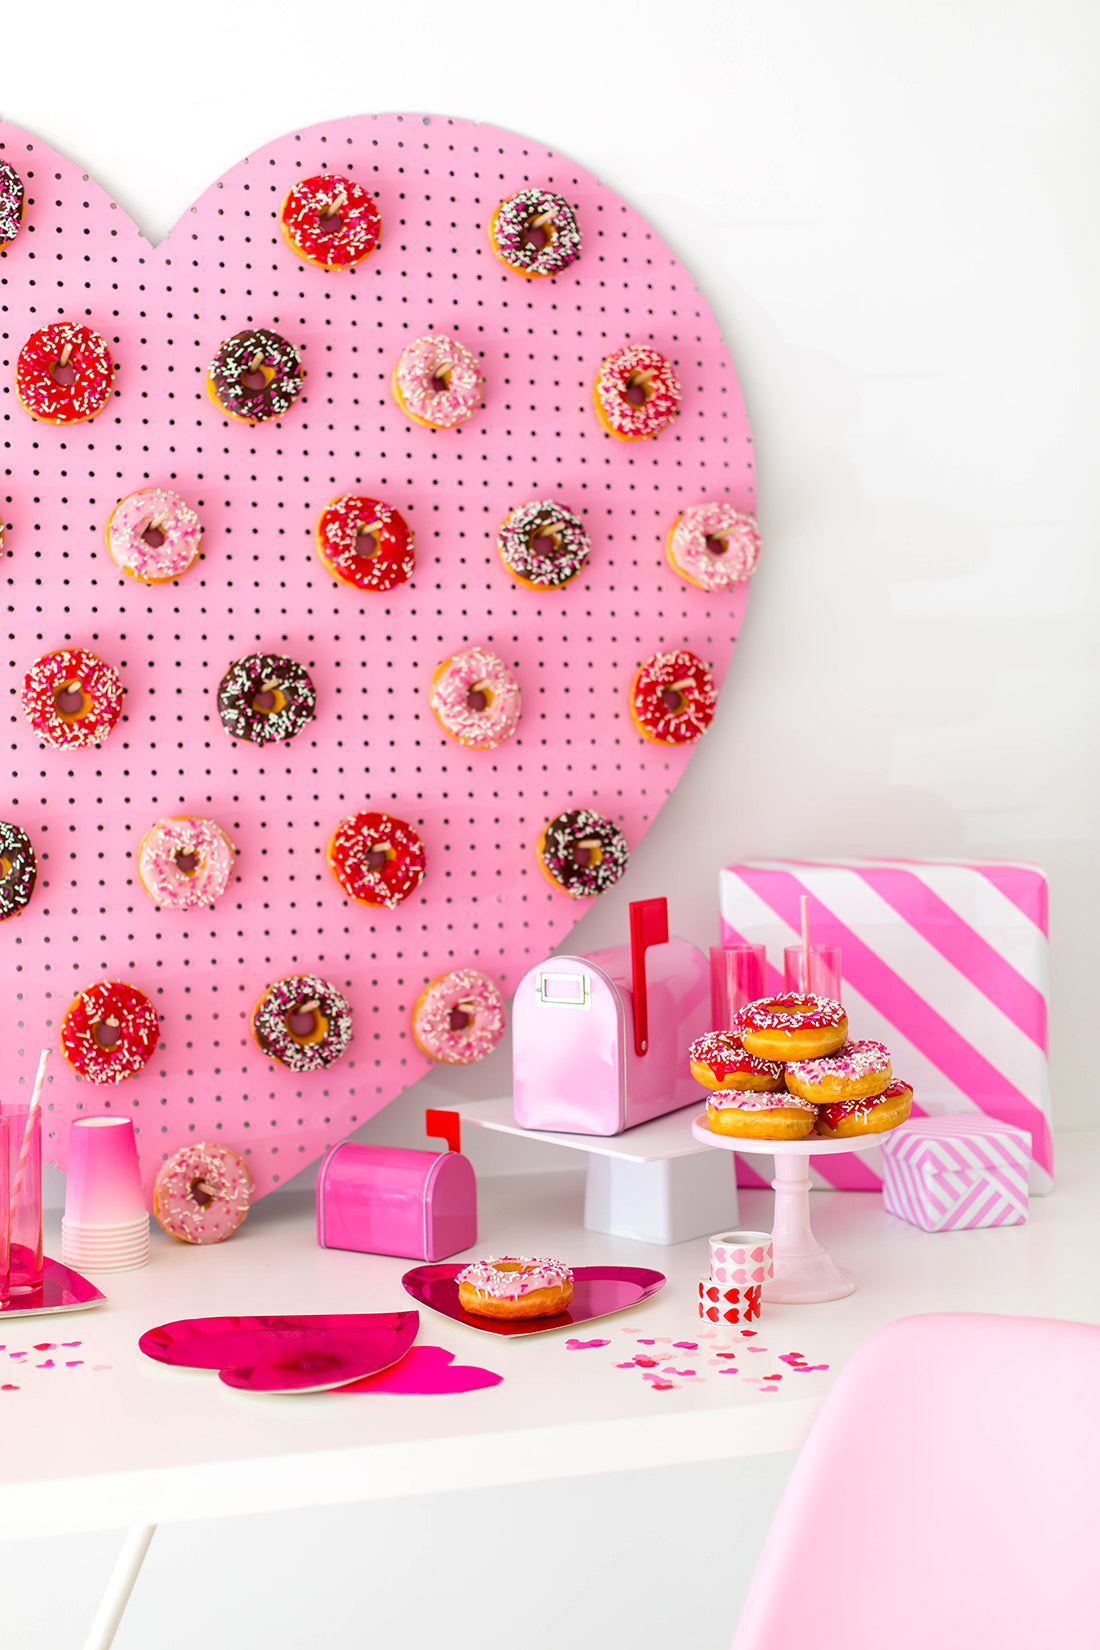 DIY Heart Donut Wall Pegboard for Valentine's Day